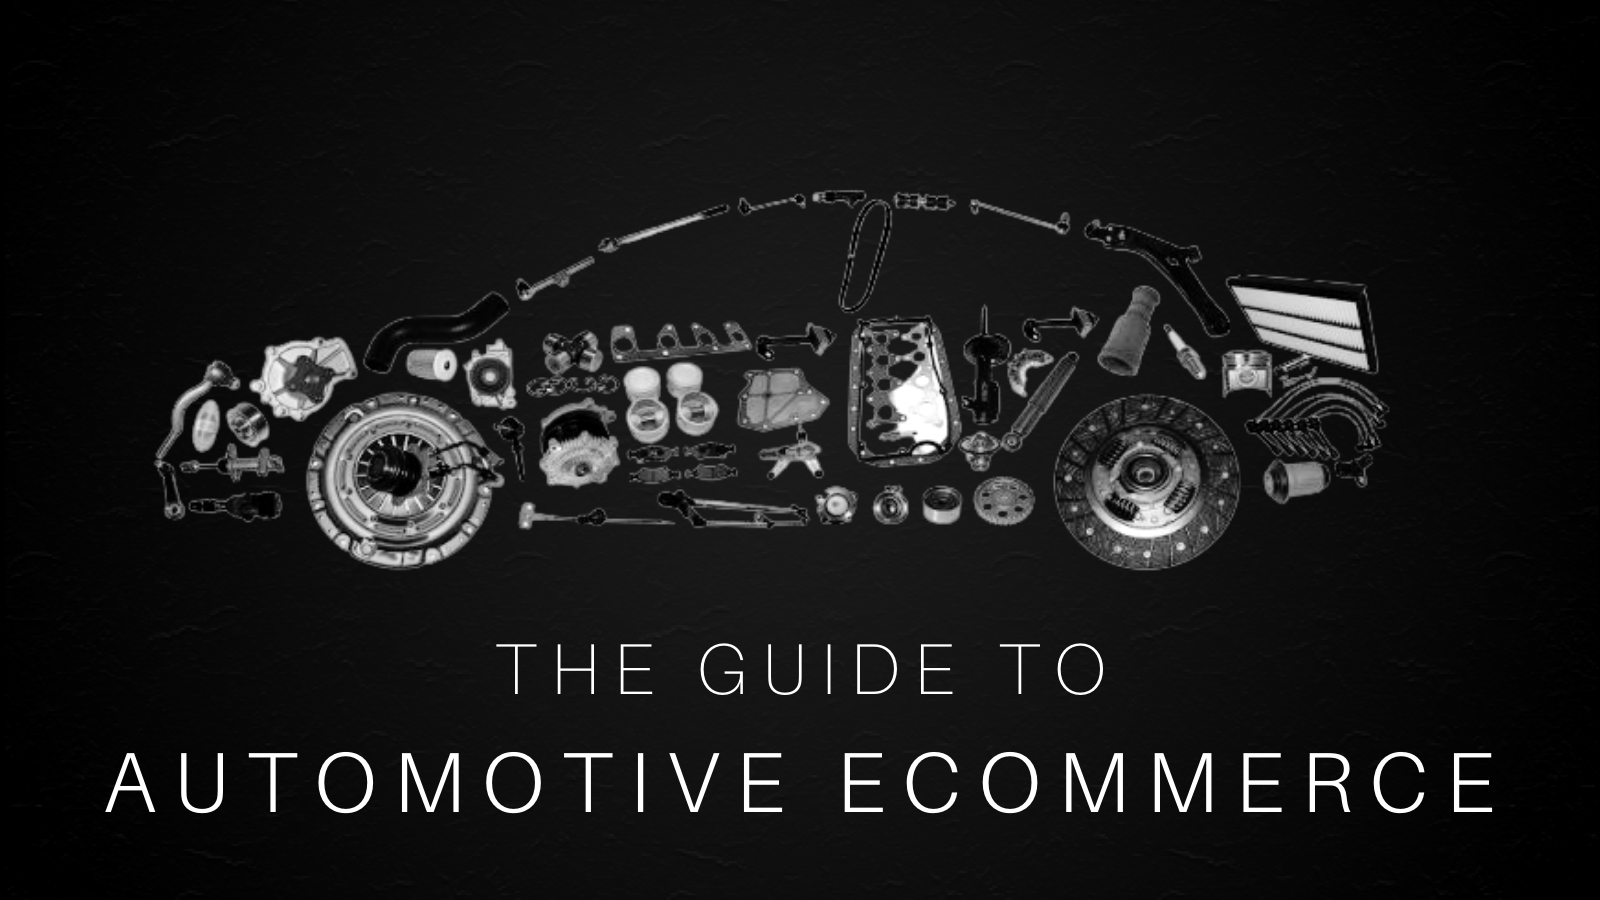 The Guide to Automotive eCommerce | THE SHOP